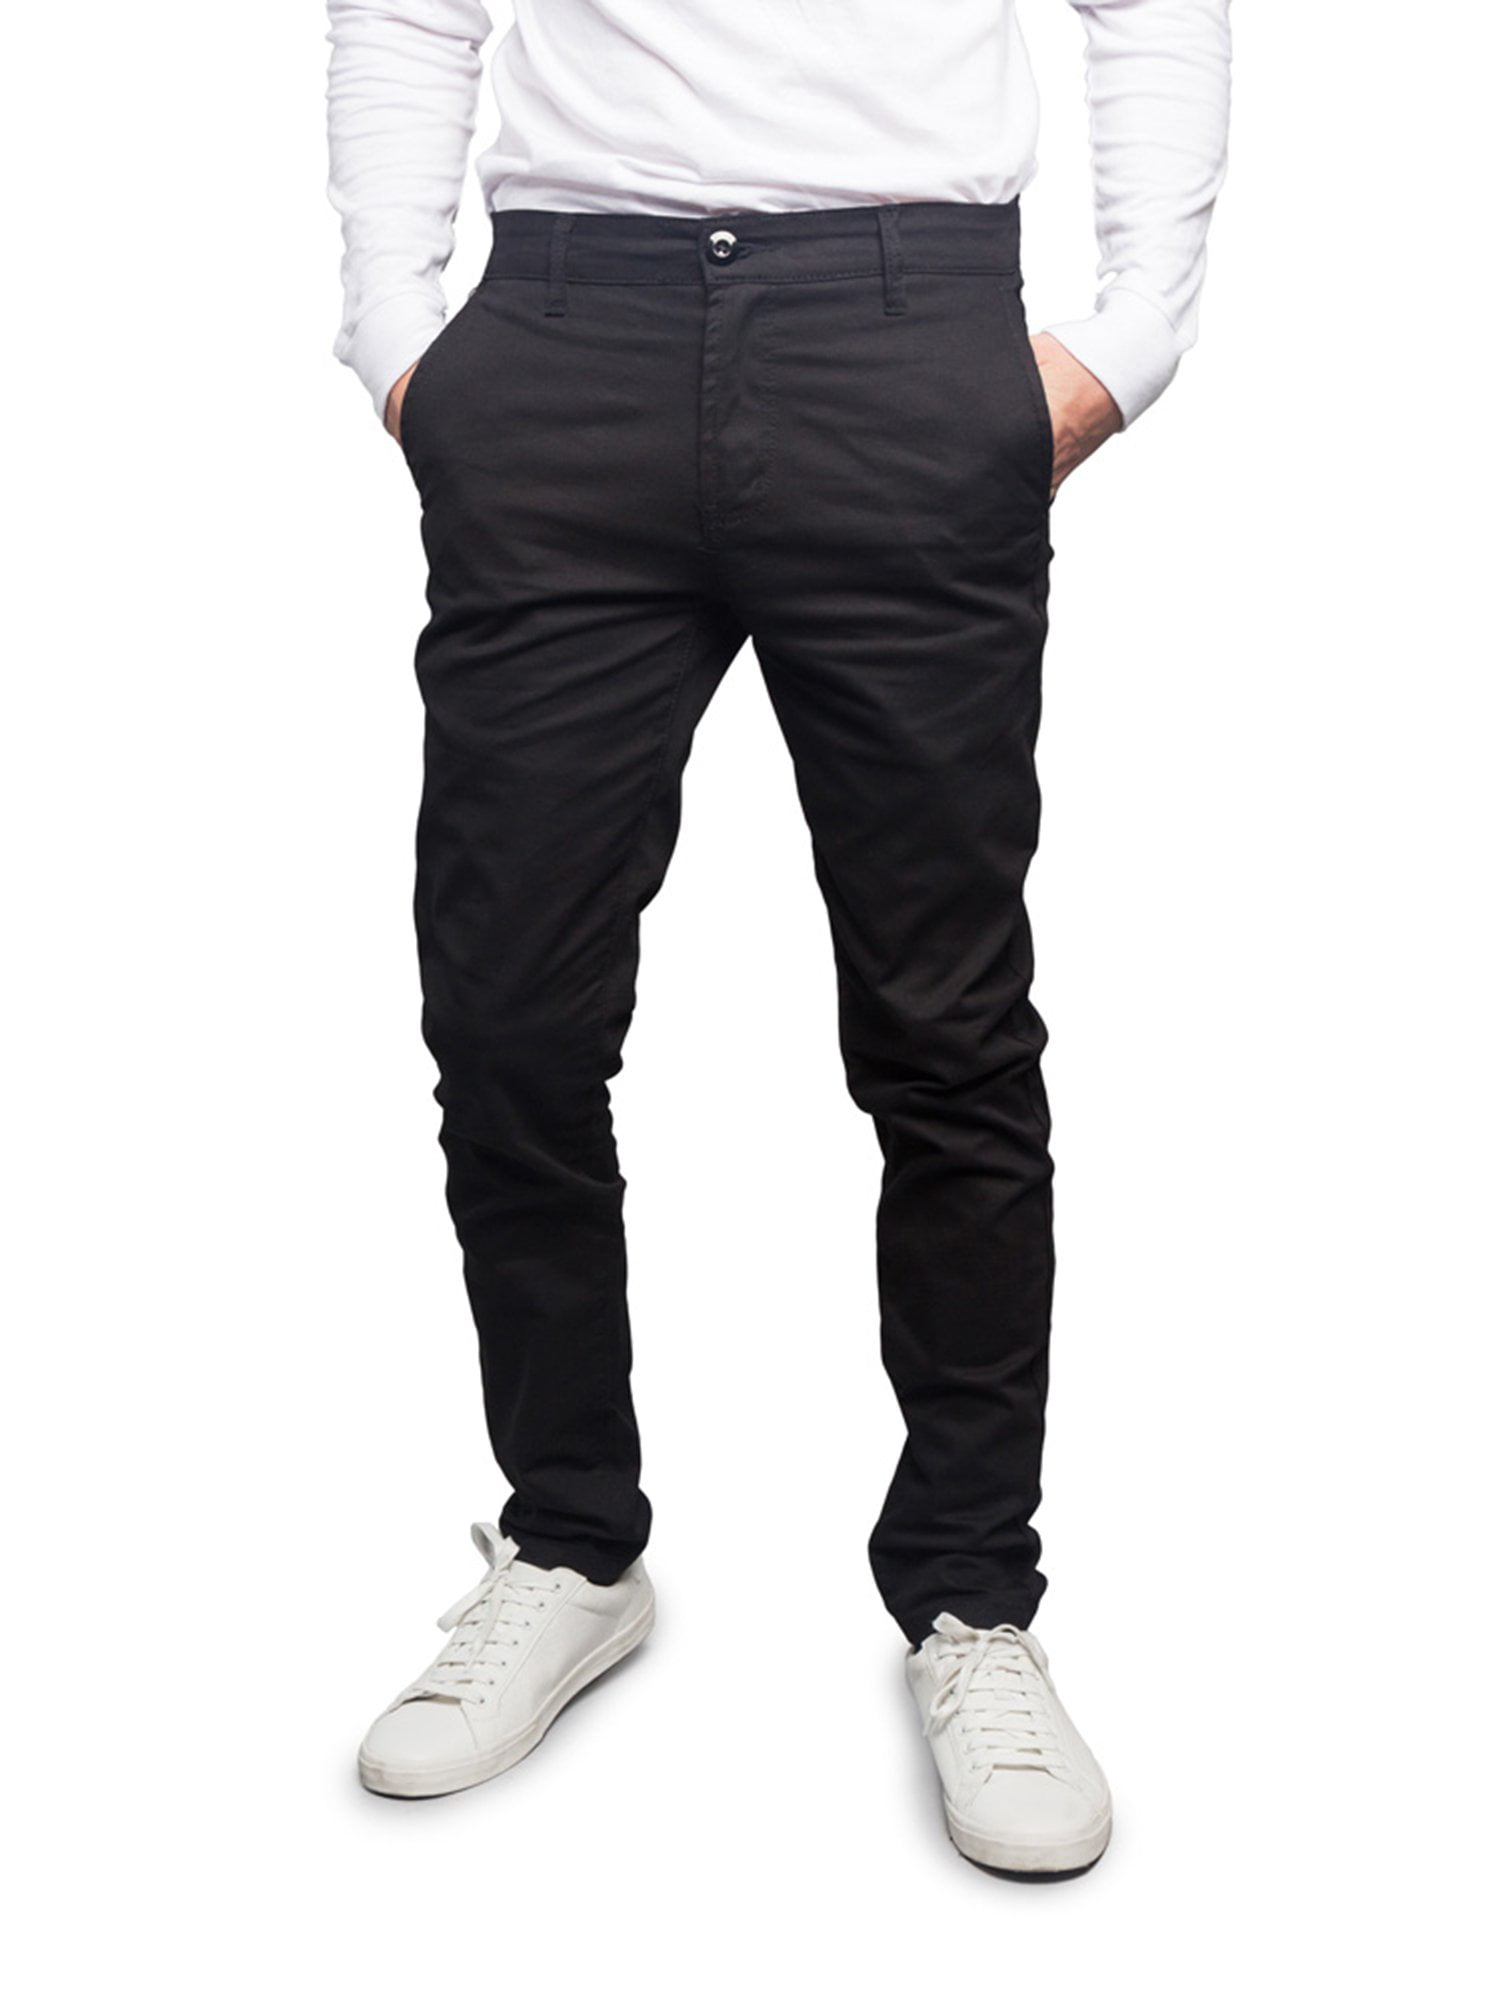 Victorious Men's Basic Trousers Casual Slim Fit Pants 